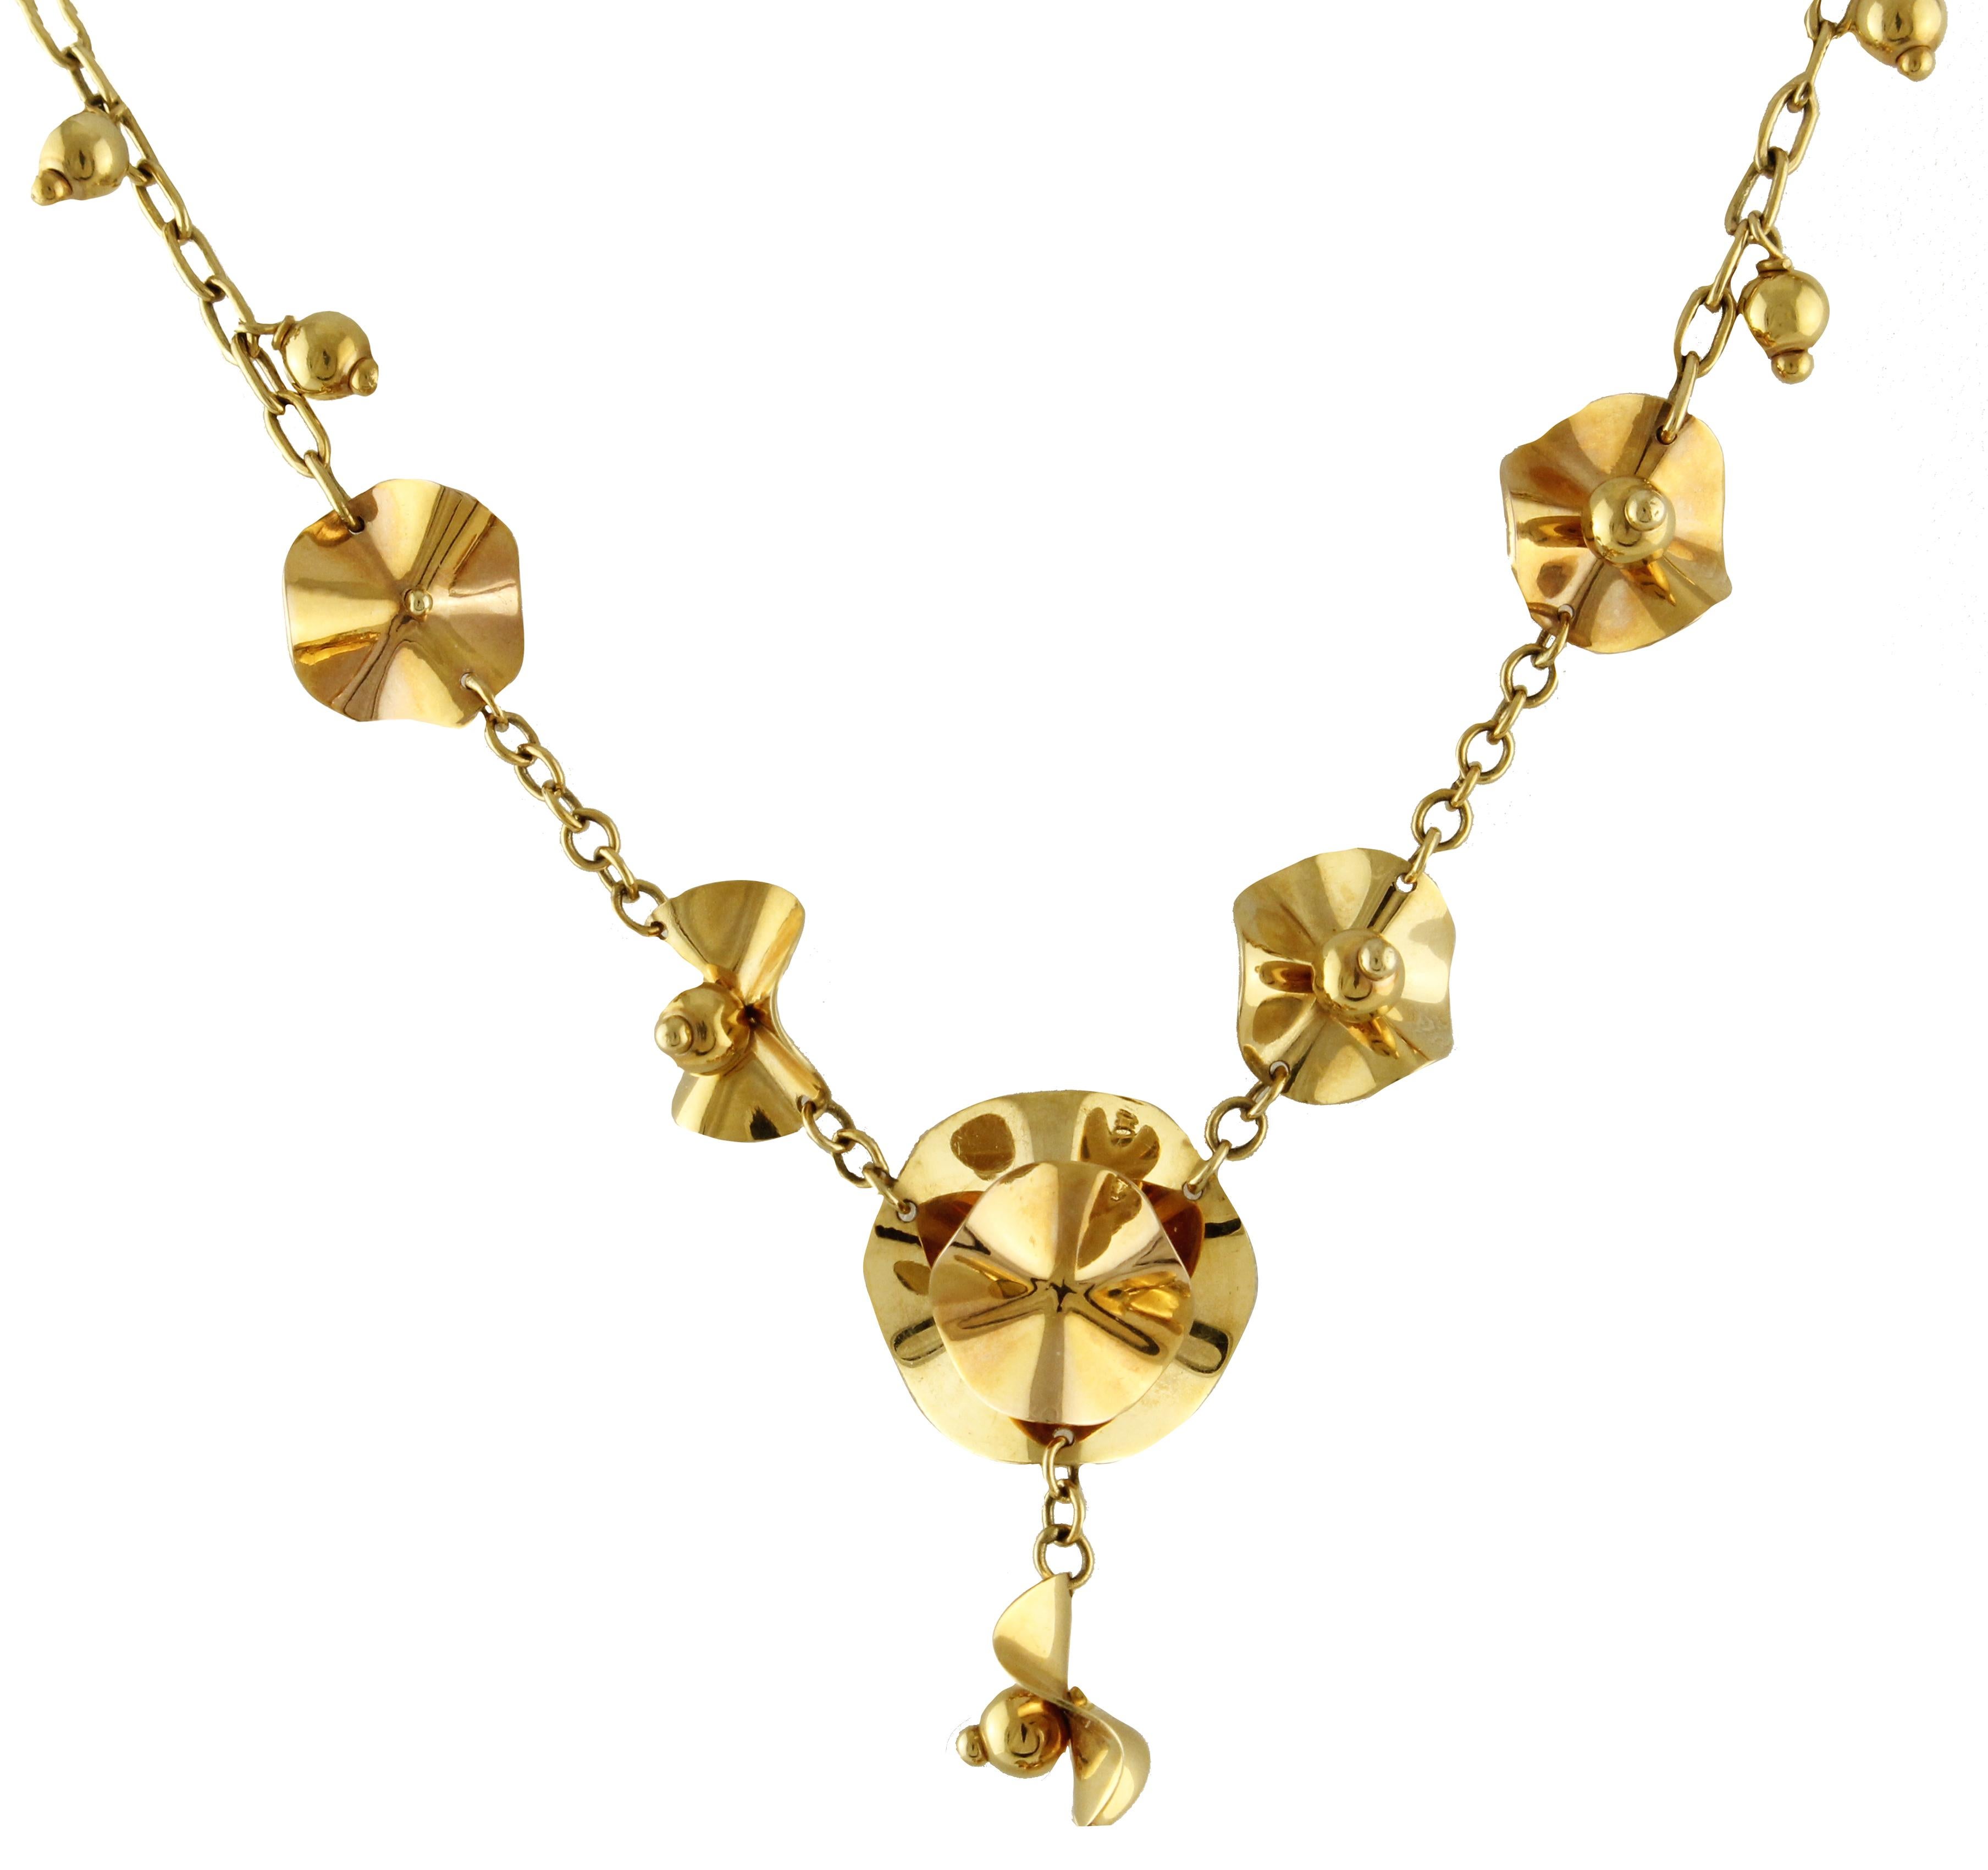 Beautiful necklace in 18 kt yellow gold. The length is 40 cm, with 8 cm pending details.
Total weight g 21.10
RF + fgri